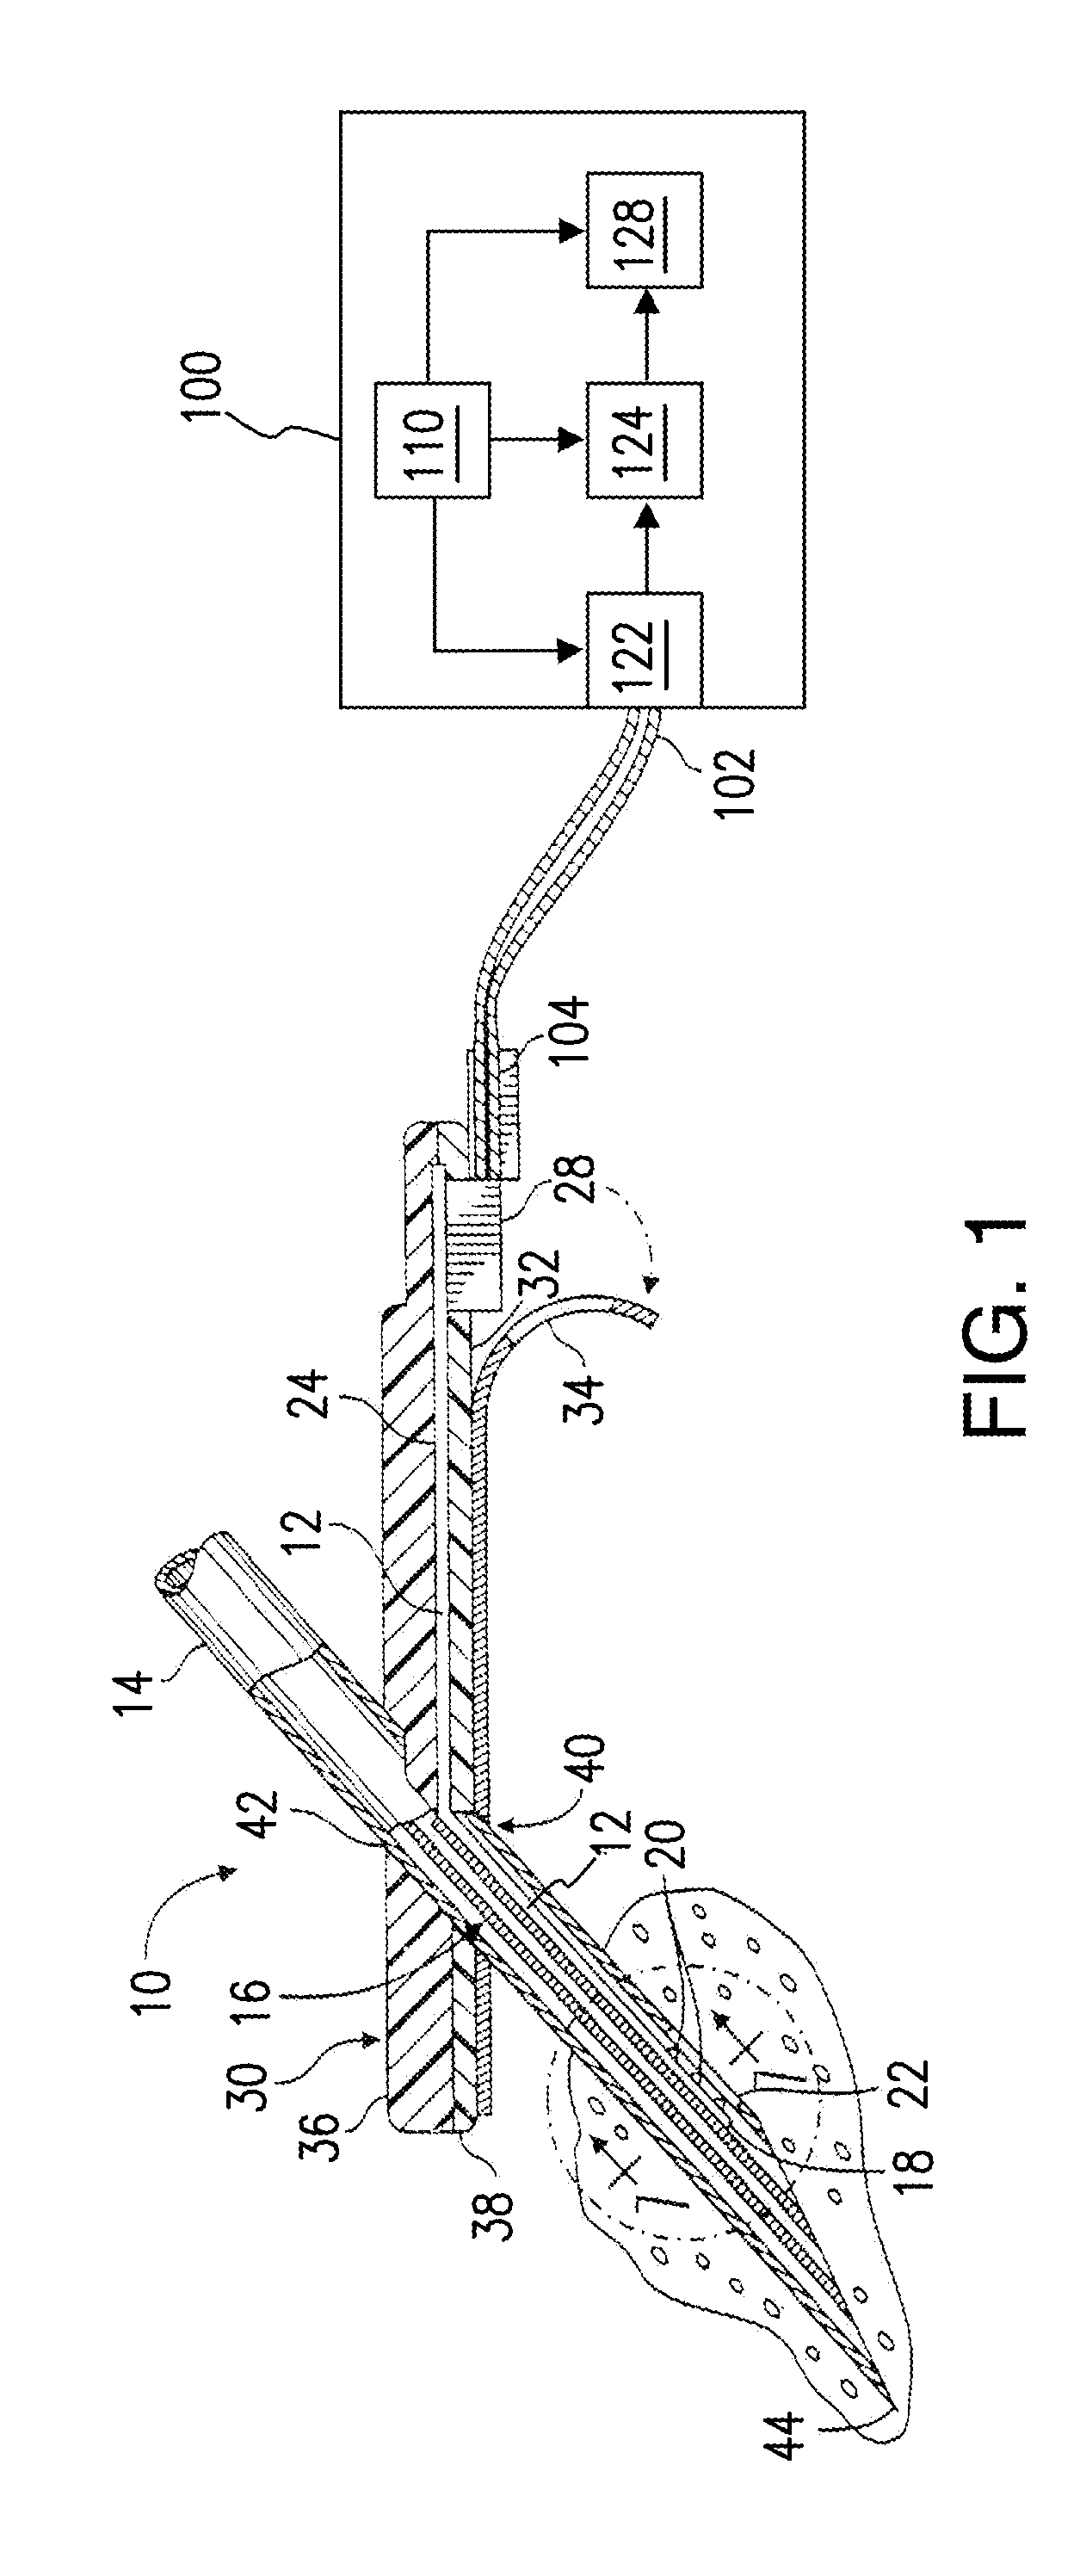 Application of electrochemical impedance spectroscopy in sensor systems, devices, and related methods